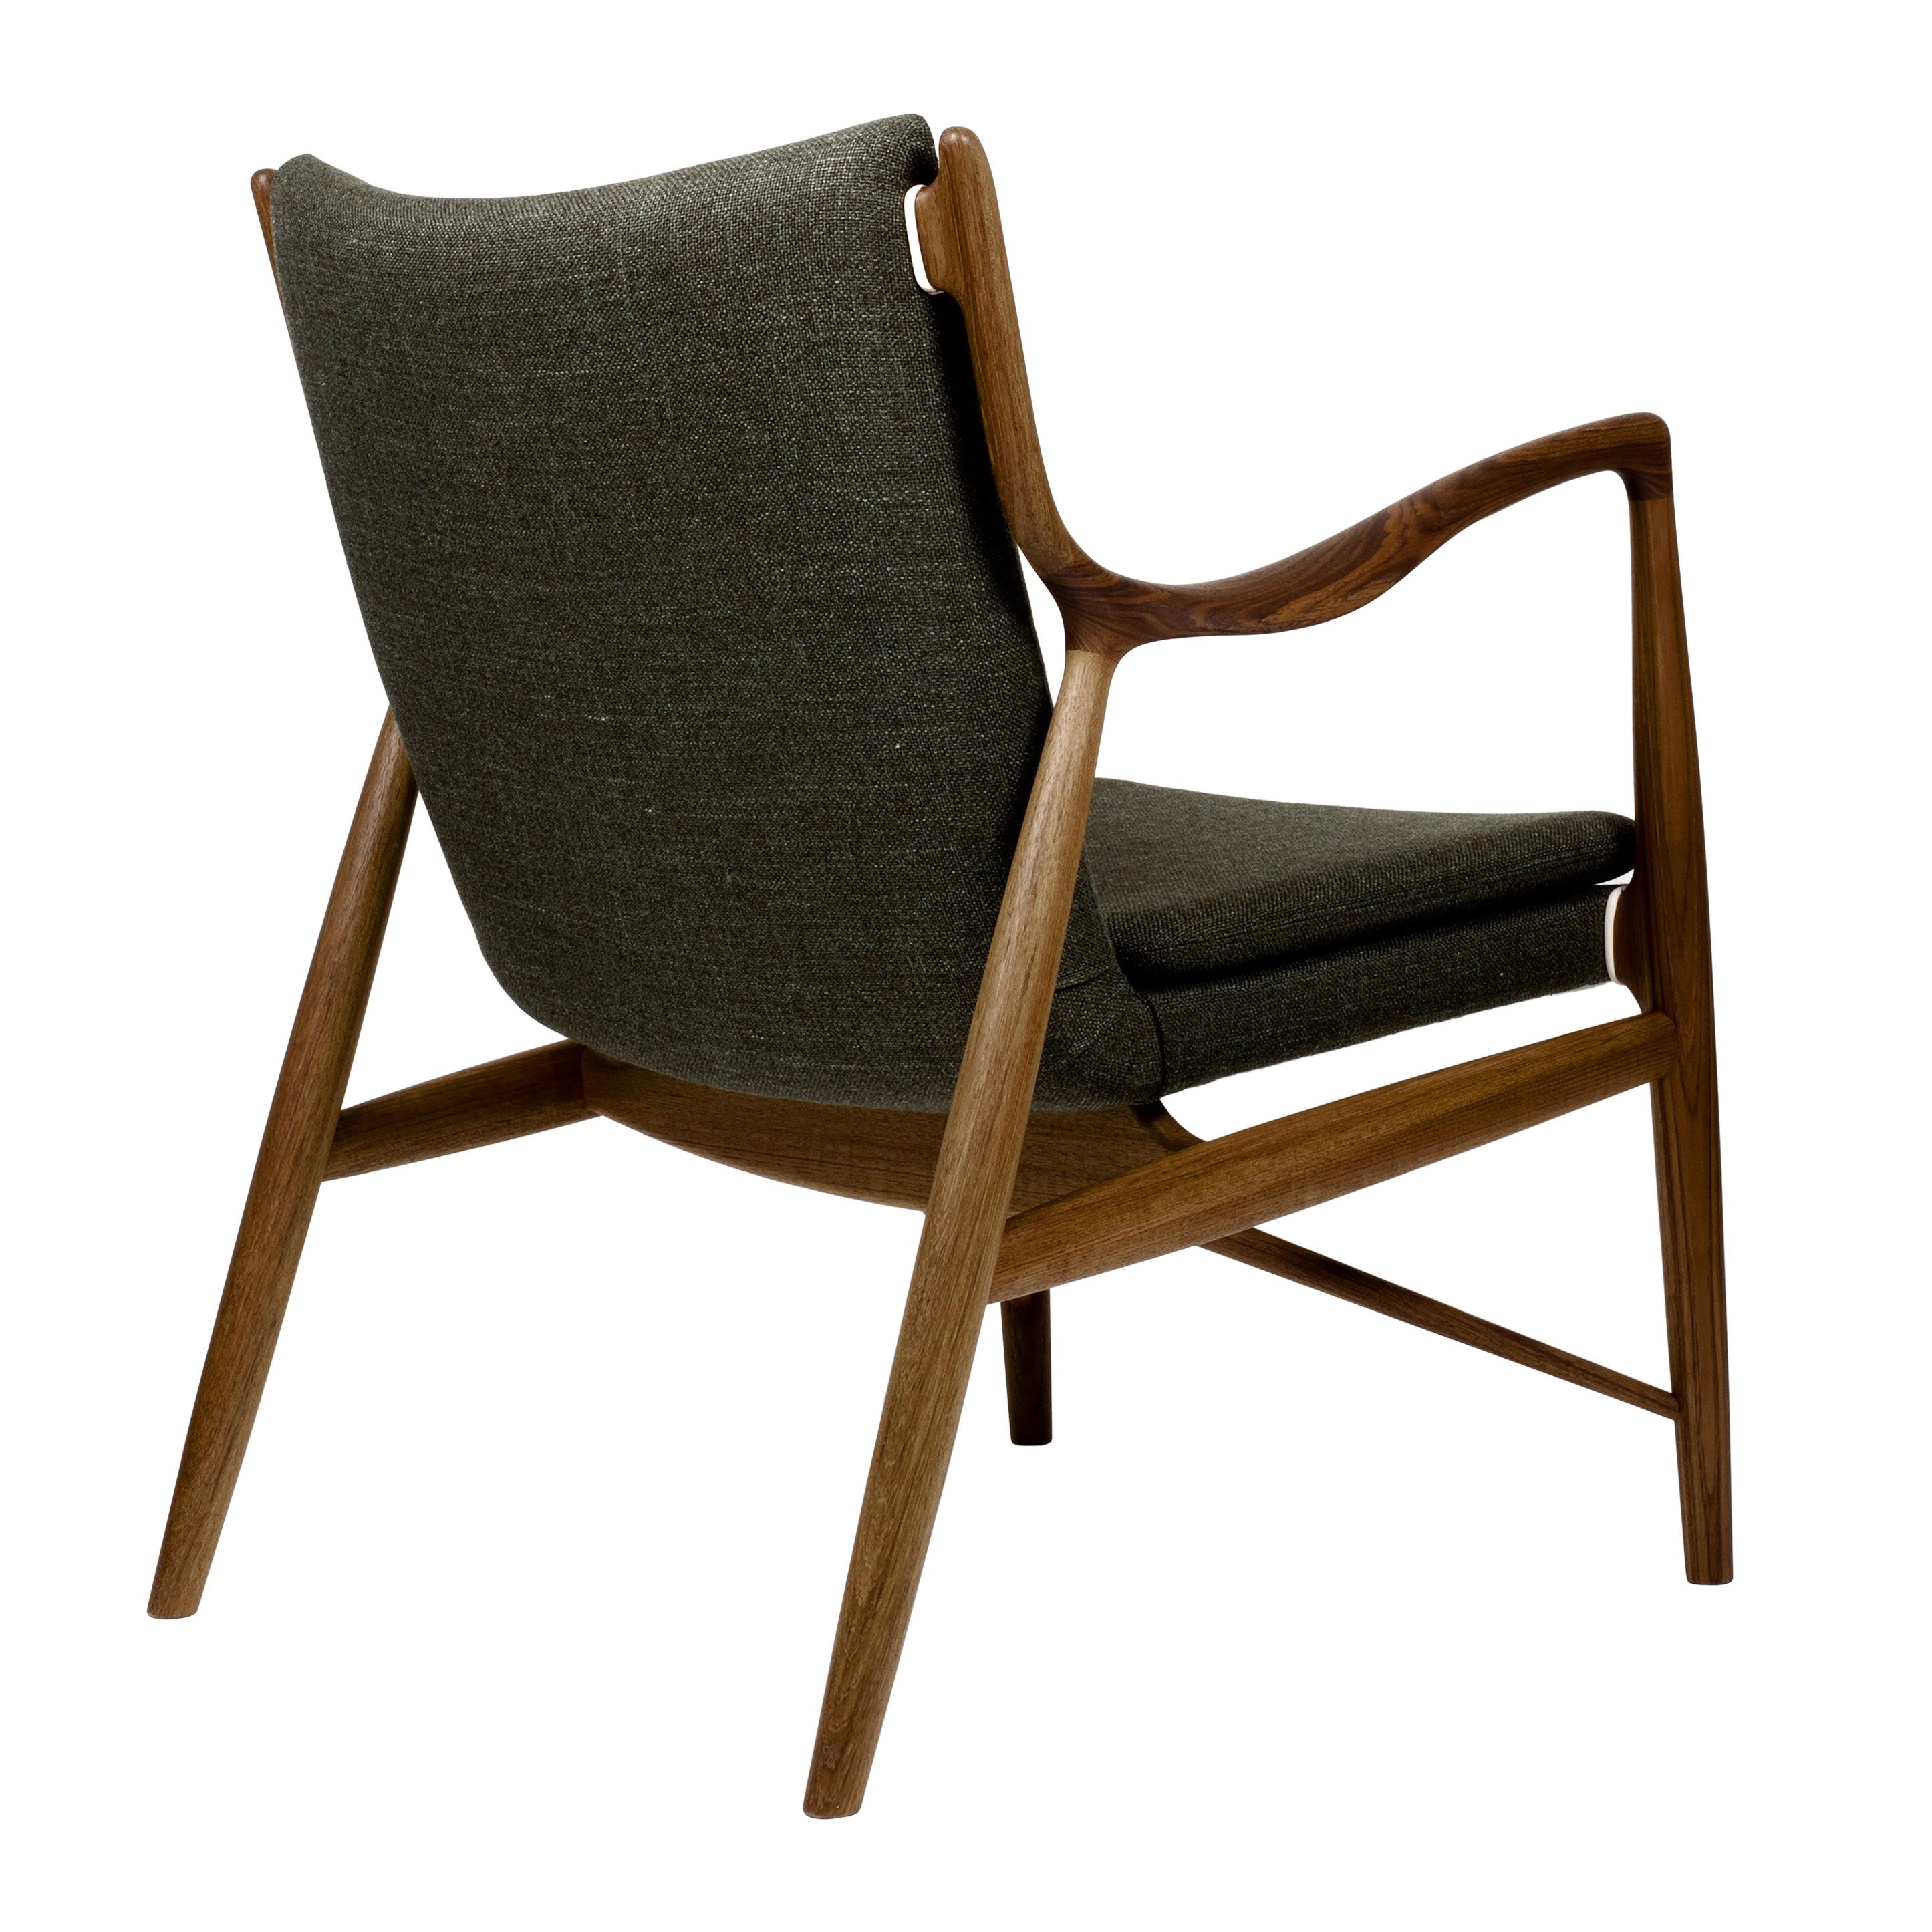 Chair designed by Finn Juhl in 1945, relaunched in 2003.
Manufactured by House of Finn Juhl in Denmark.

In the Autumn of 1945, Finn Juhl presented the 45 Chair at the annual Cabinetmakers’ Guild Exhibition. Today, the chair is widely regarded as